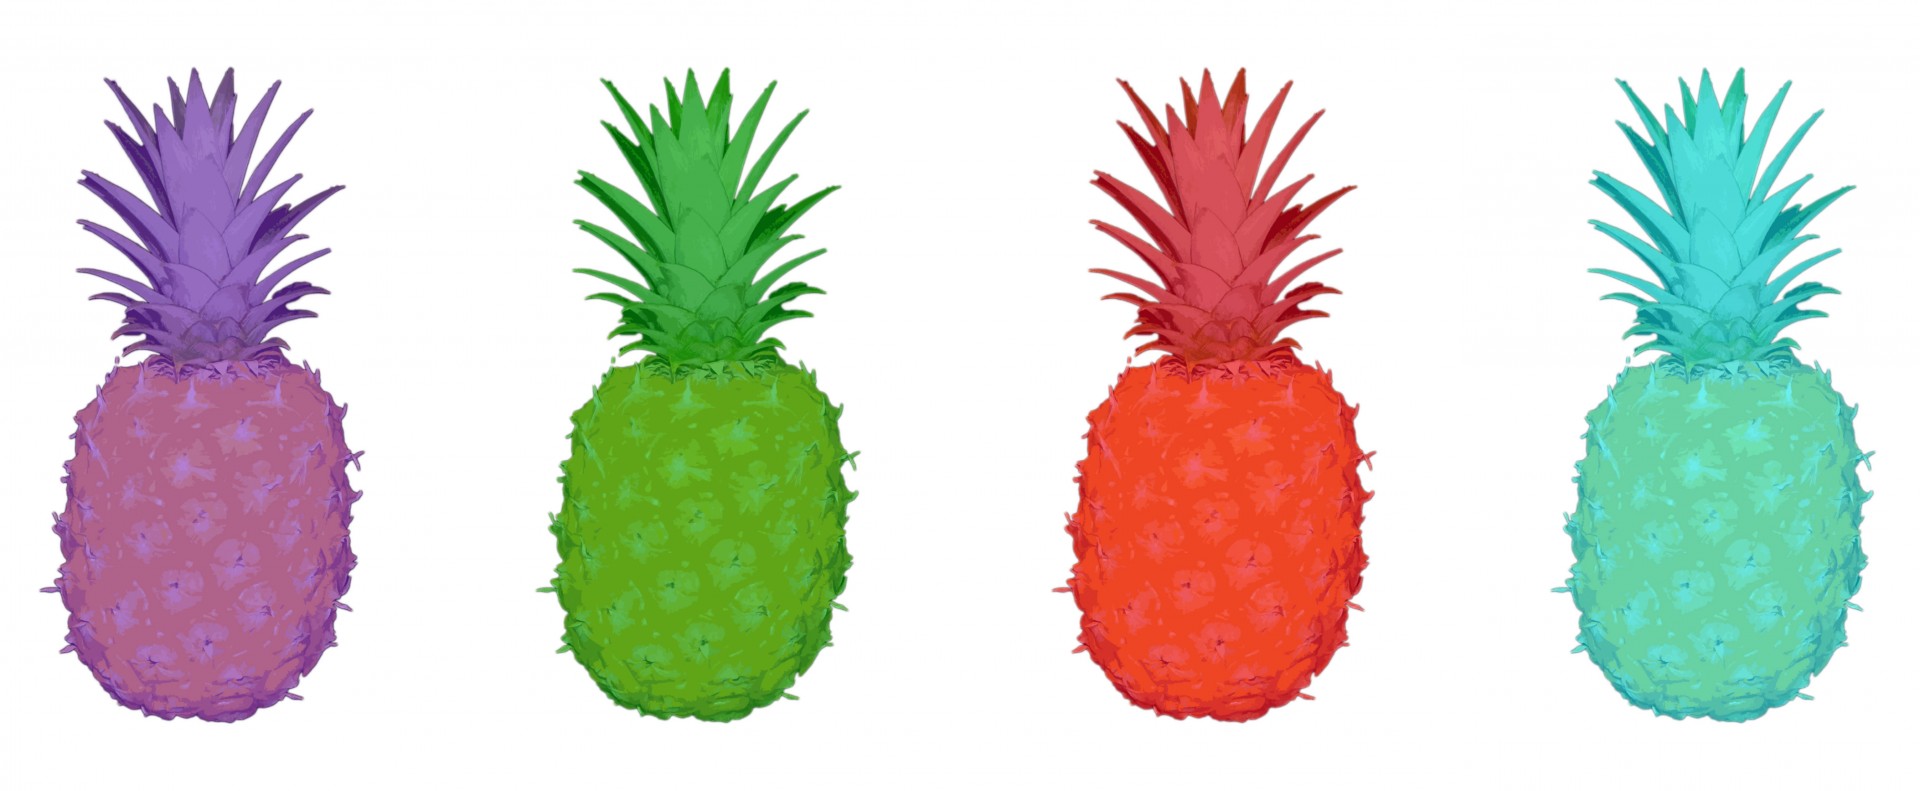 pineapple pineapples colorful free photo